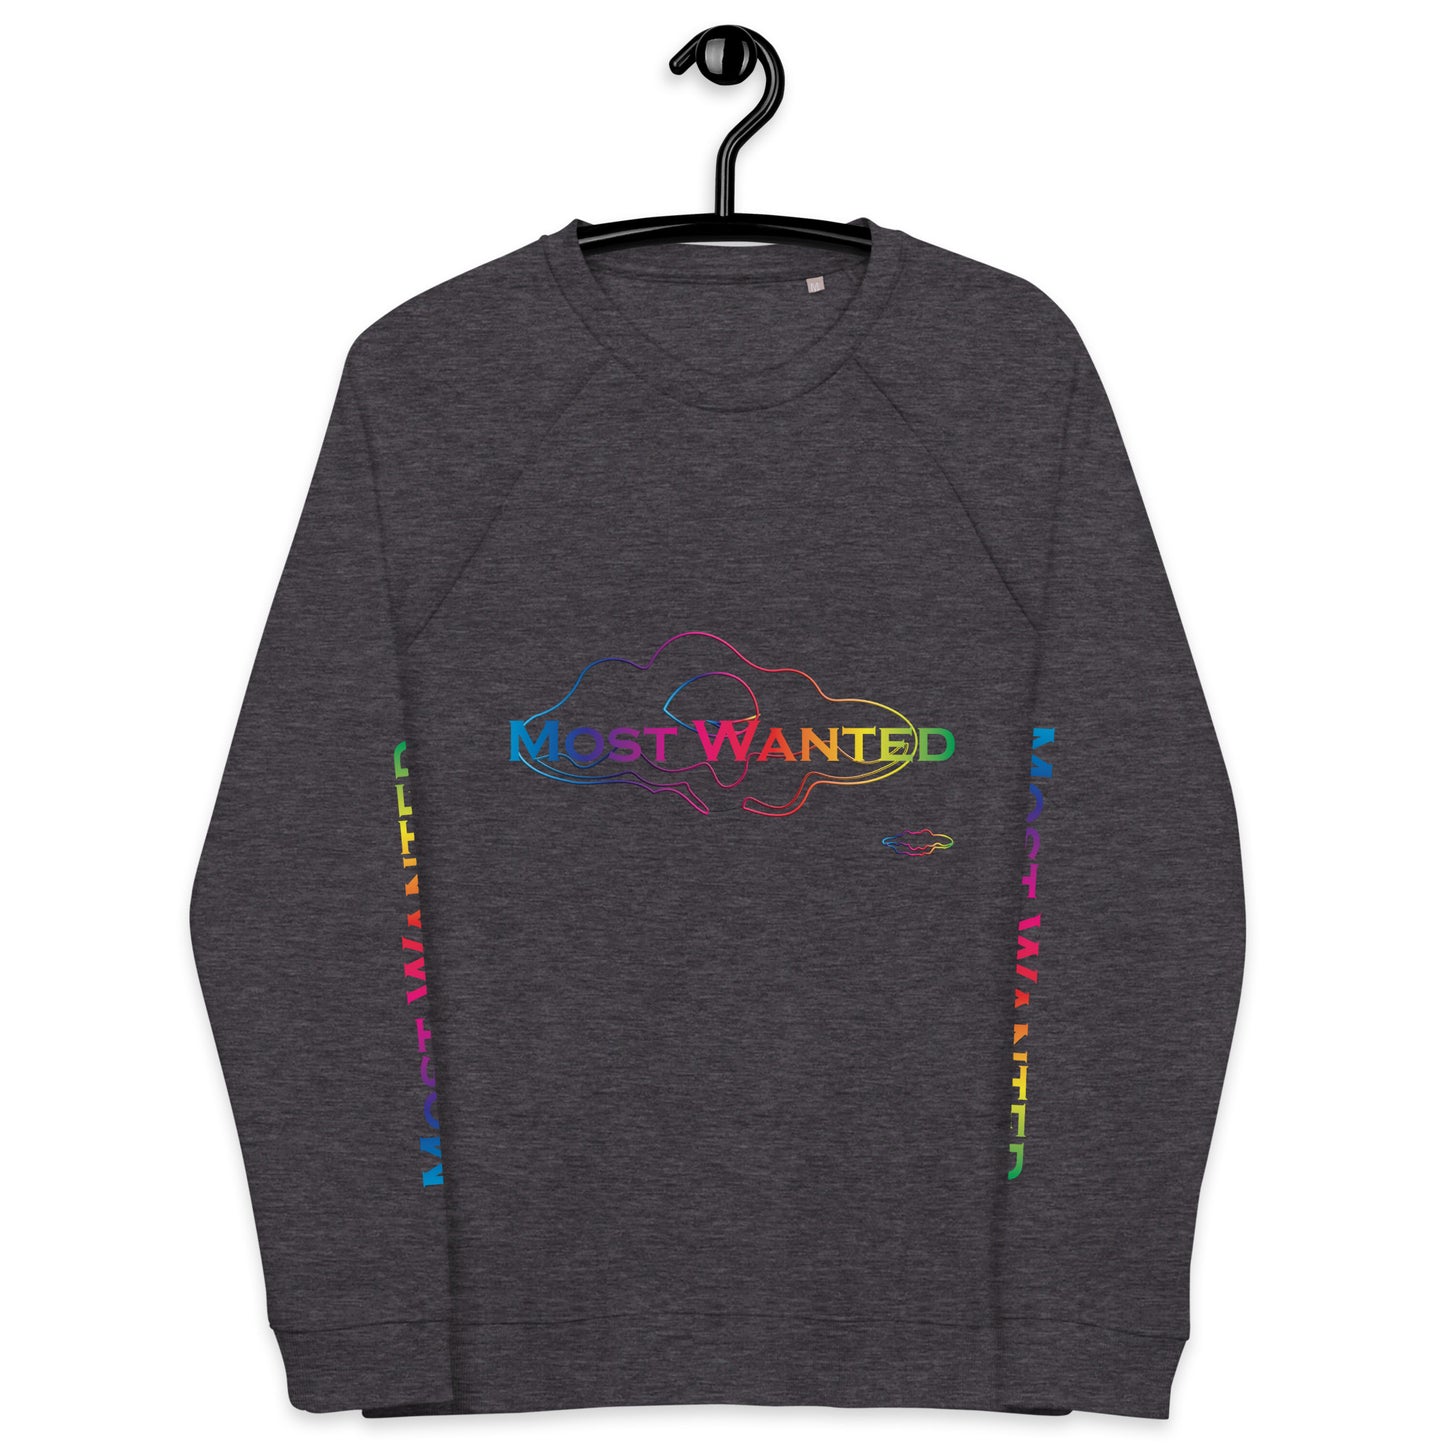 MOST WANTED CLOUDS🌨️🌨️   SWEATER #3⭐⭐⭐